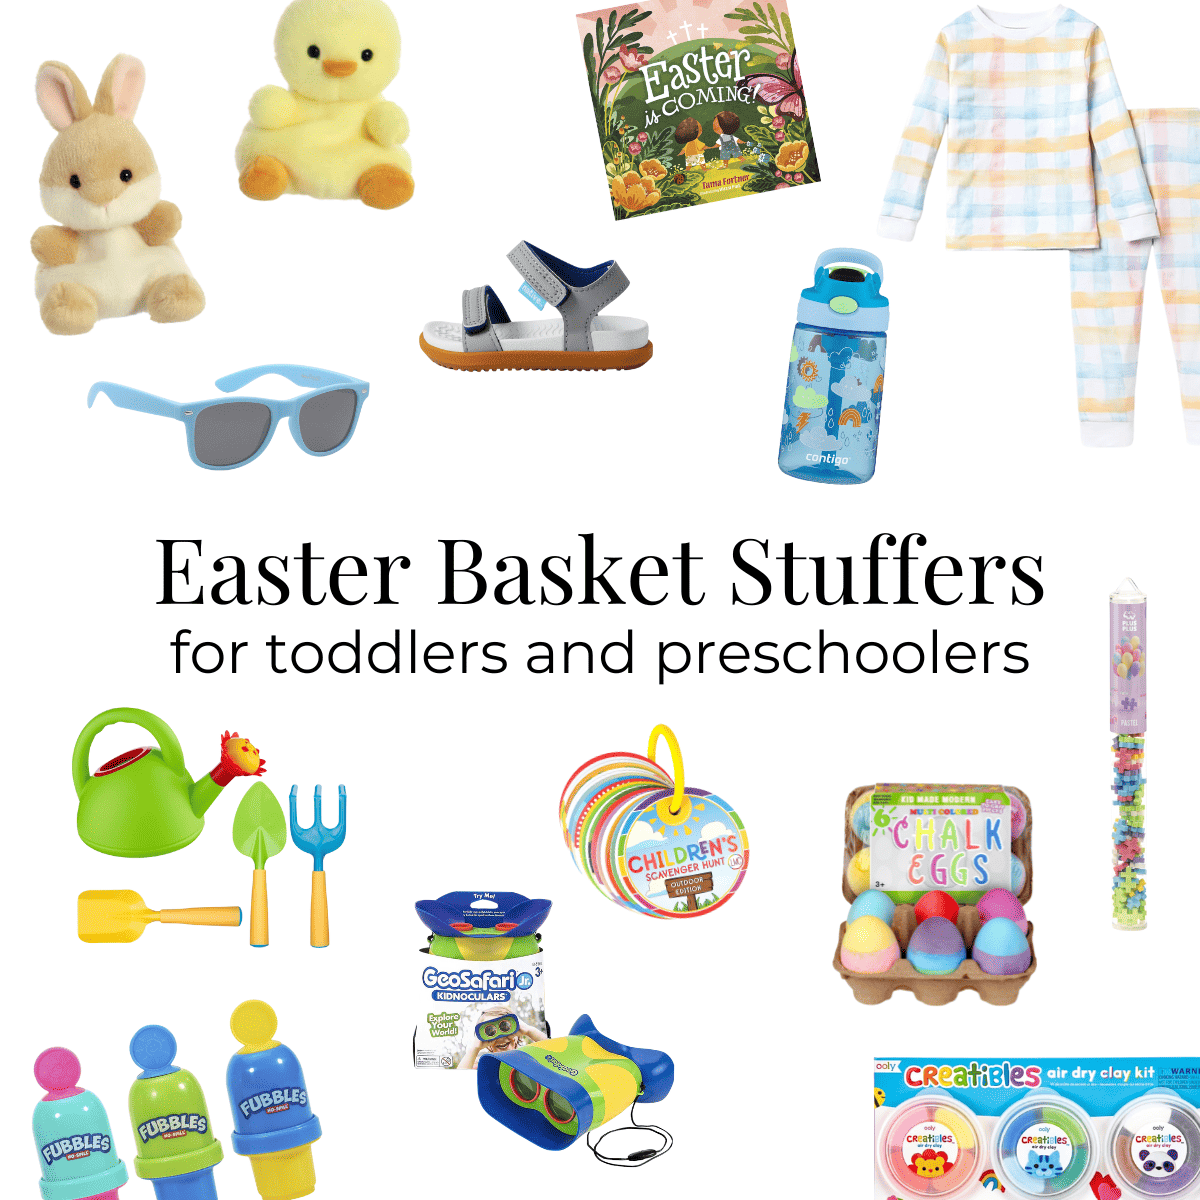 Easter Basket Stuffers for Toddlers and Preschoolers